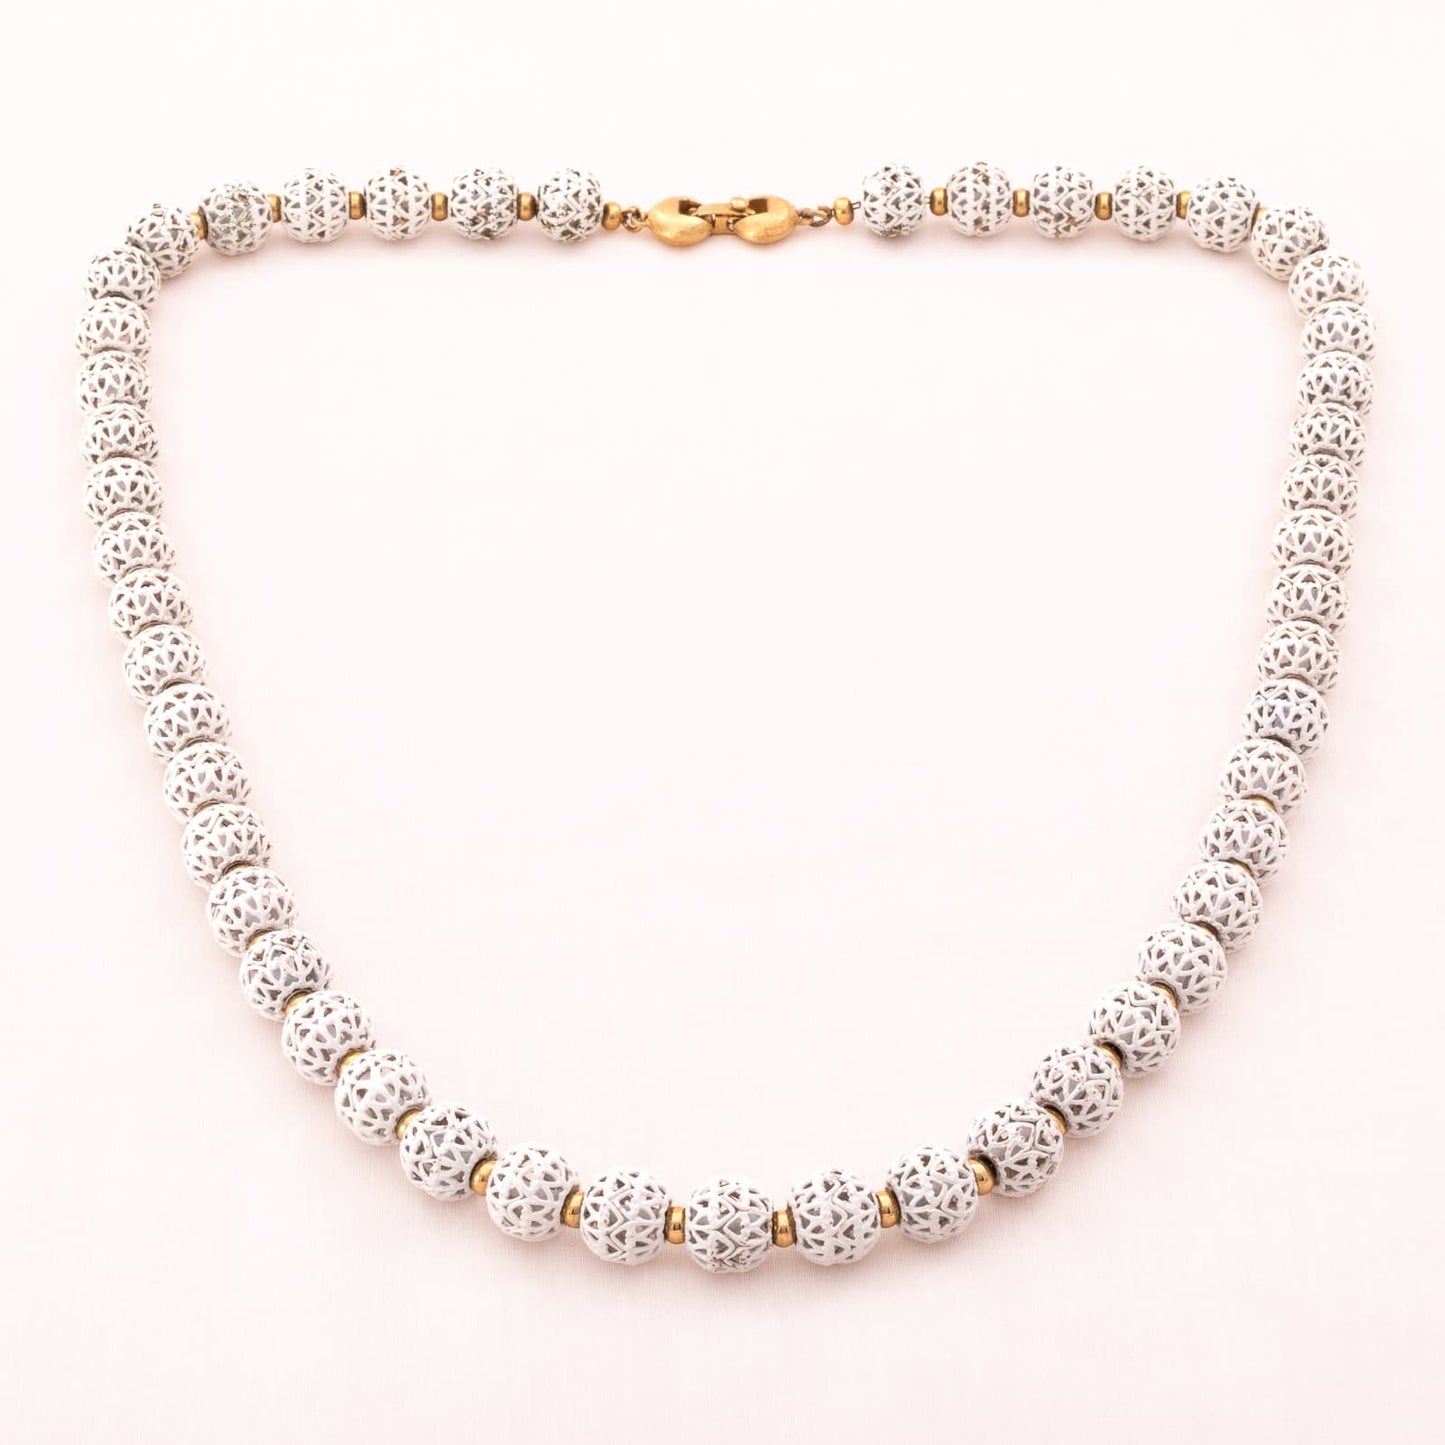 MONET white necklace from the Georgette series from 1970